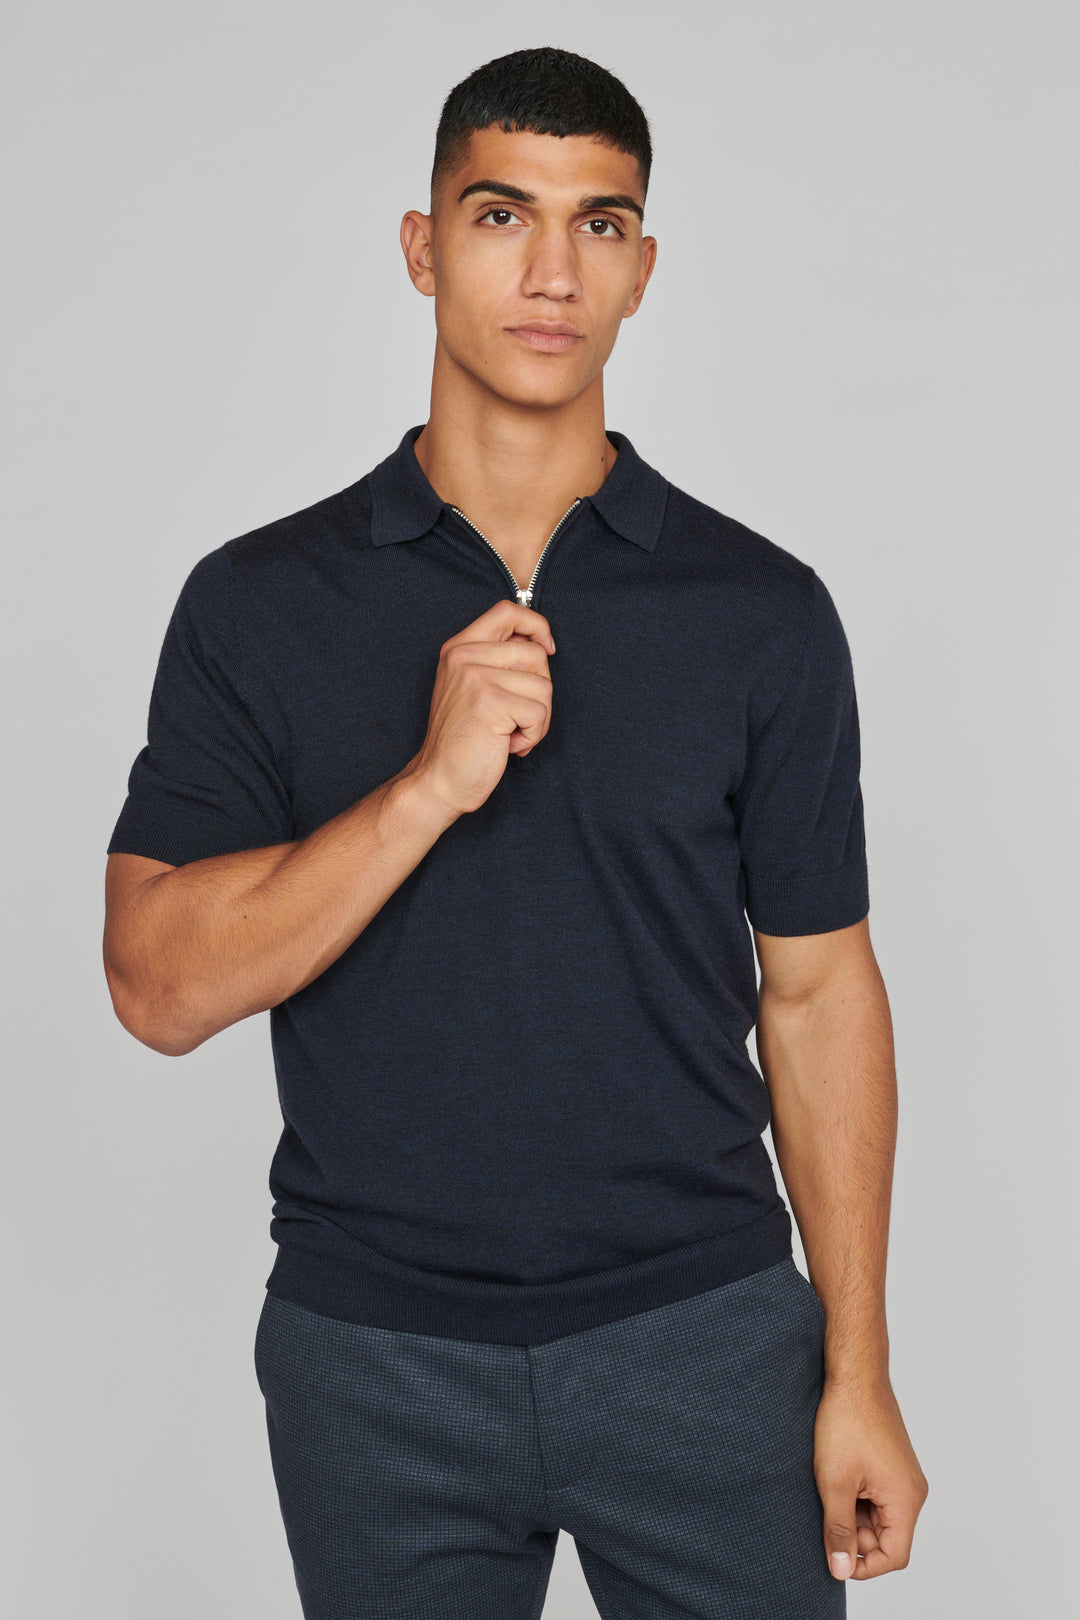 MAPOLO KNIT (NAVY) - MATINIQUE